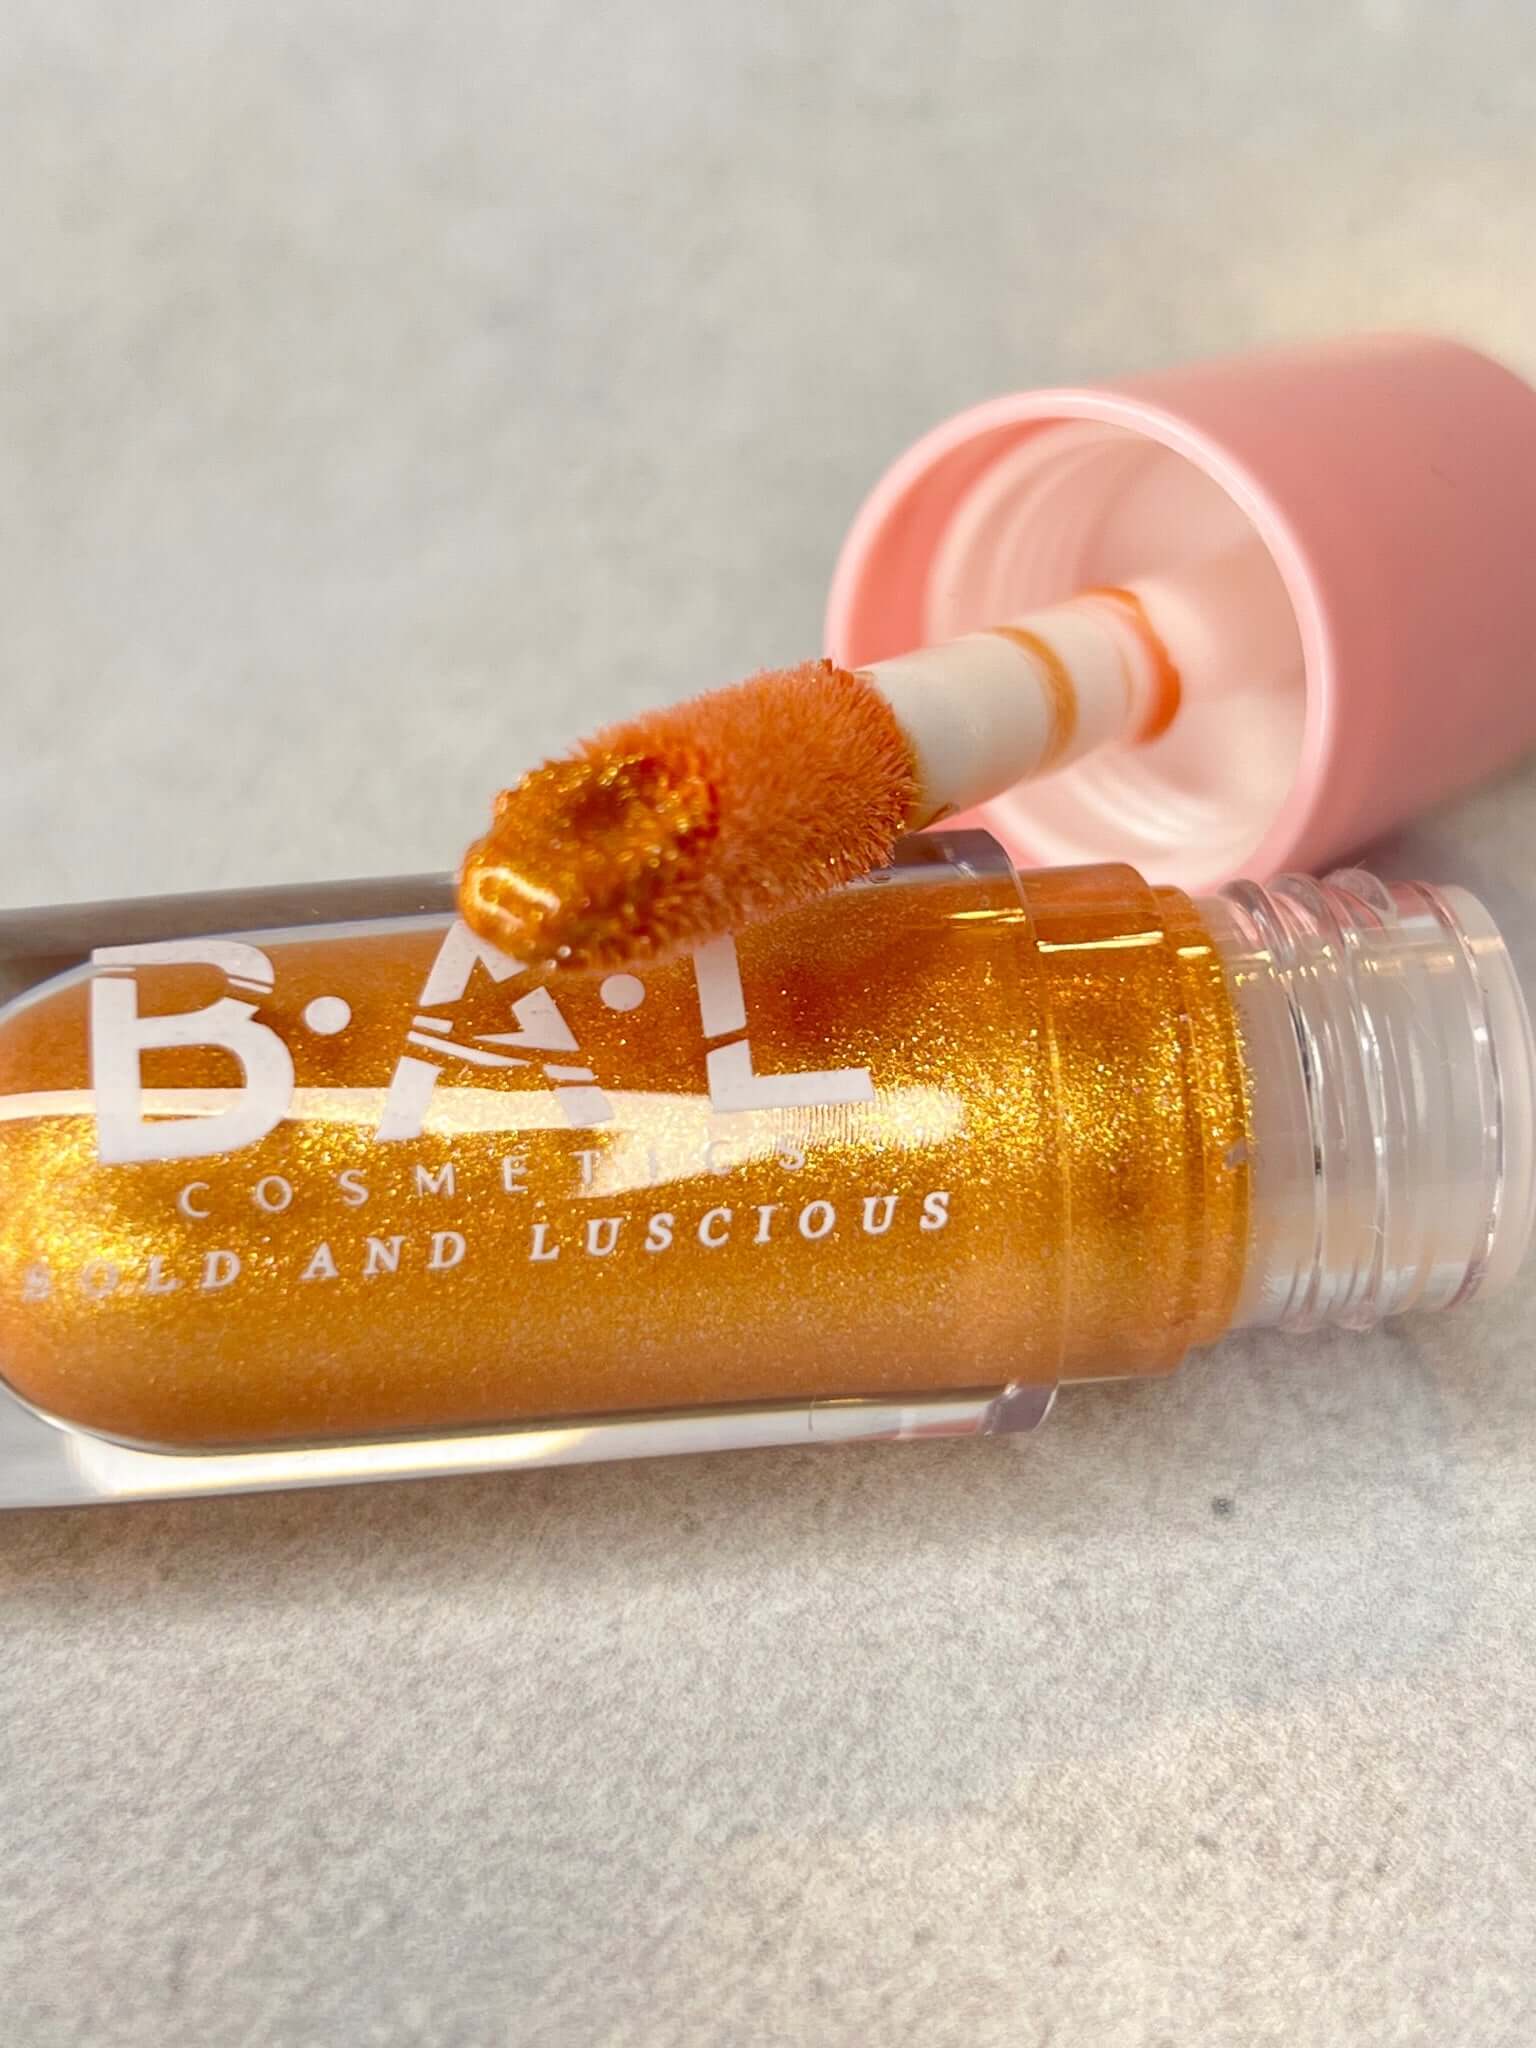 The bottle of champagne Glassy Gloss is laying on its side showing all of the detail in the color.  The color is gold with gold glitter. 